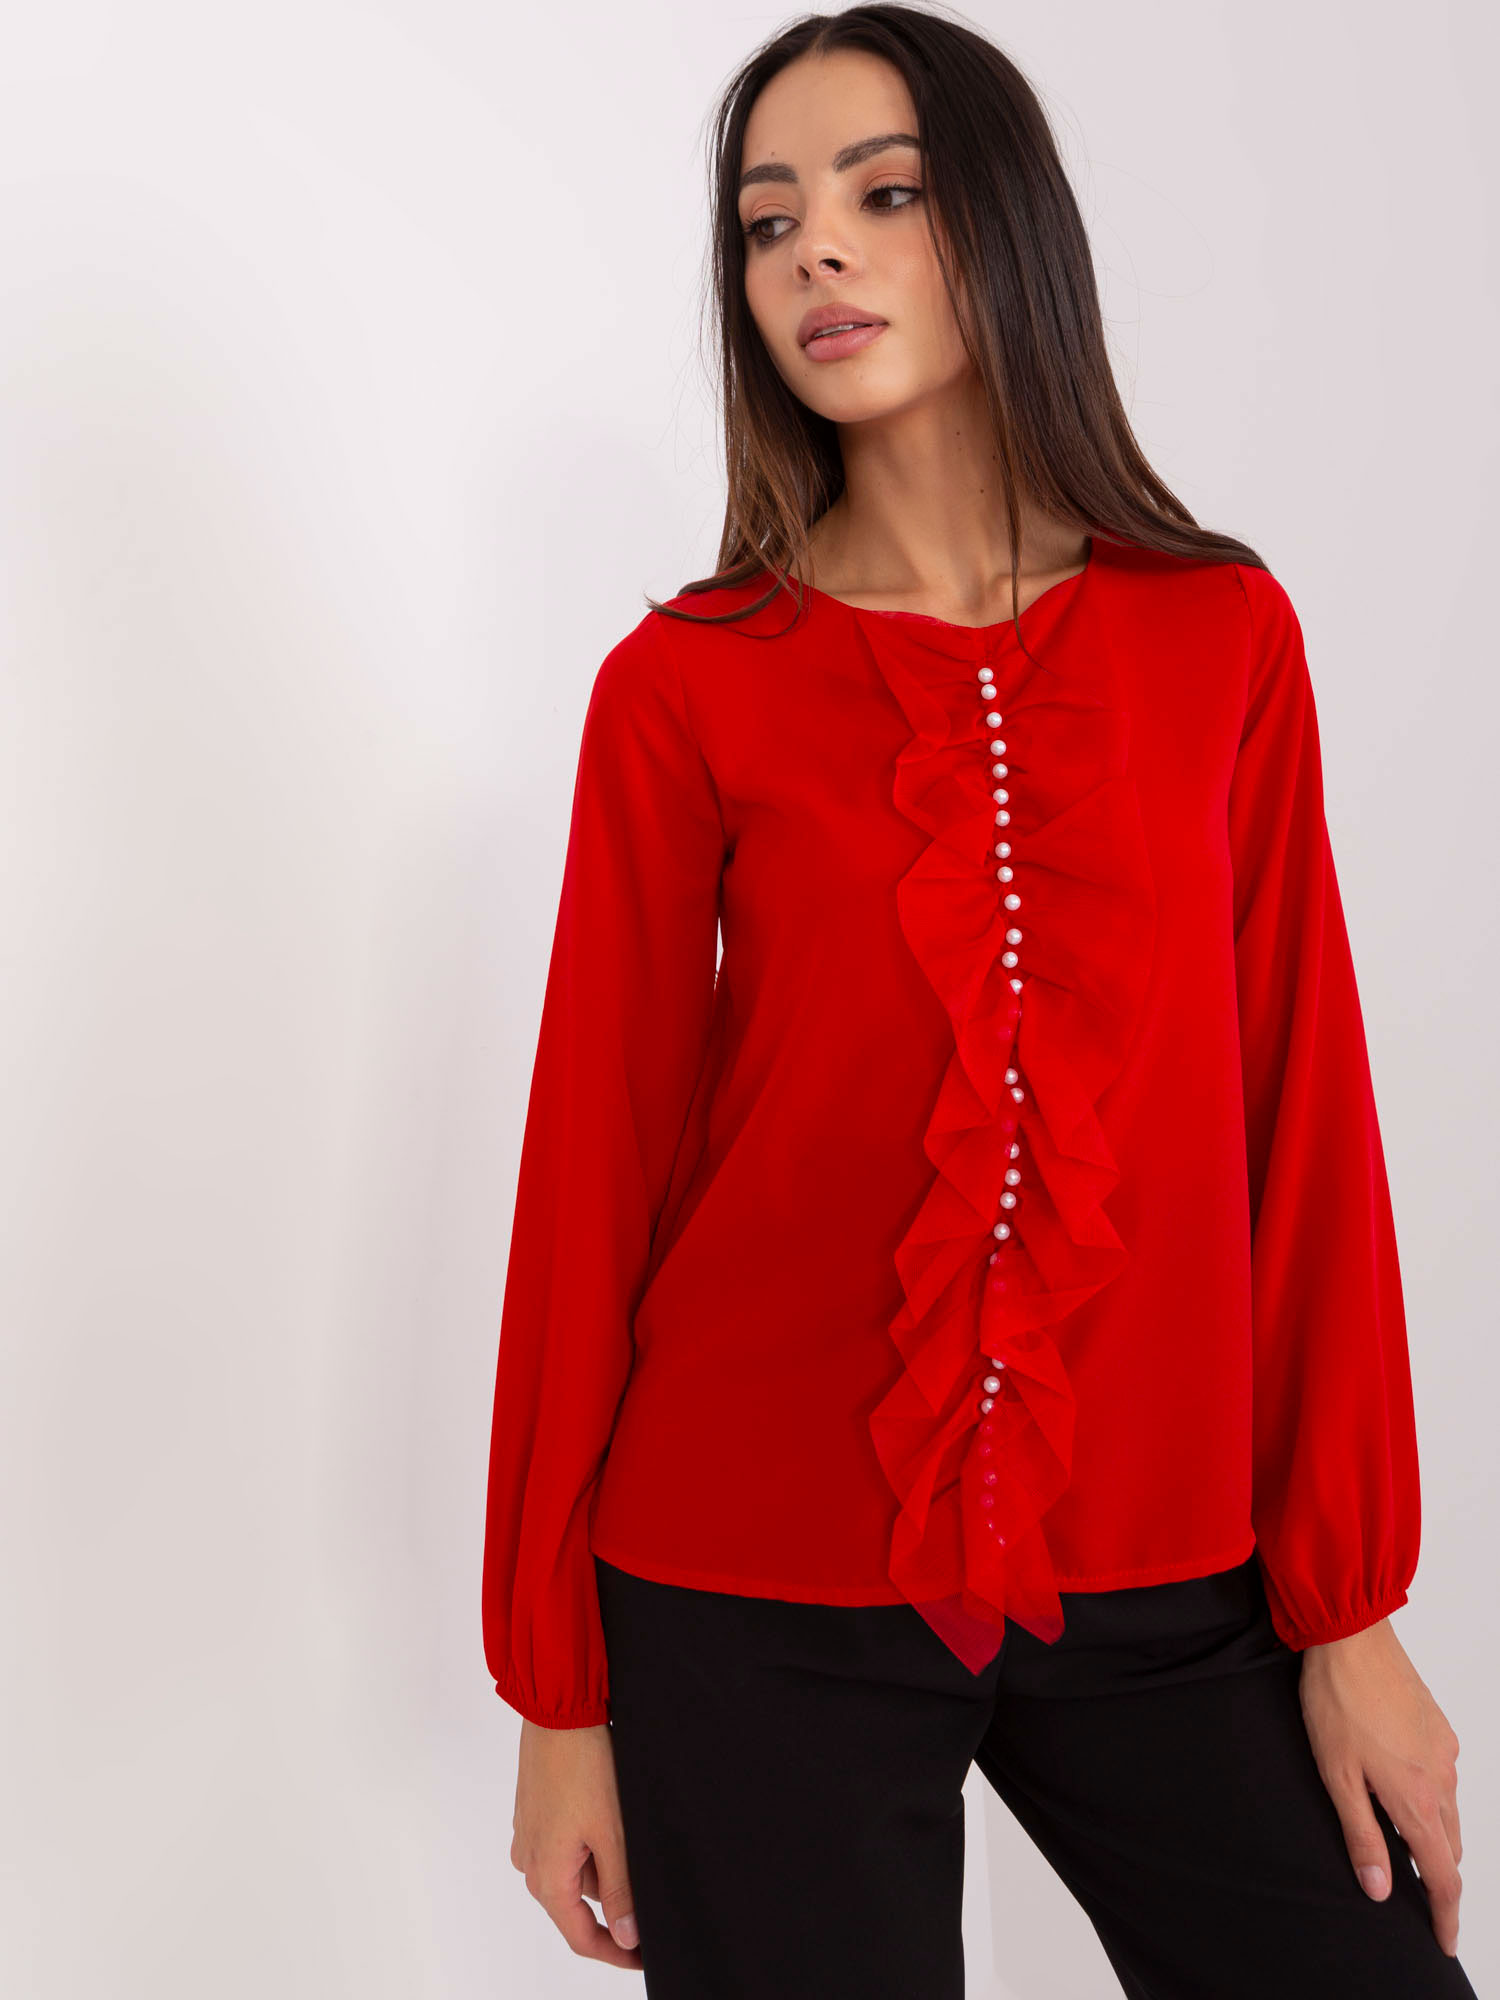 Red formal blouse with round neckline